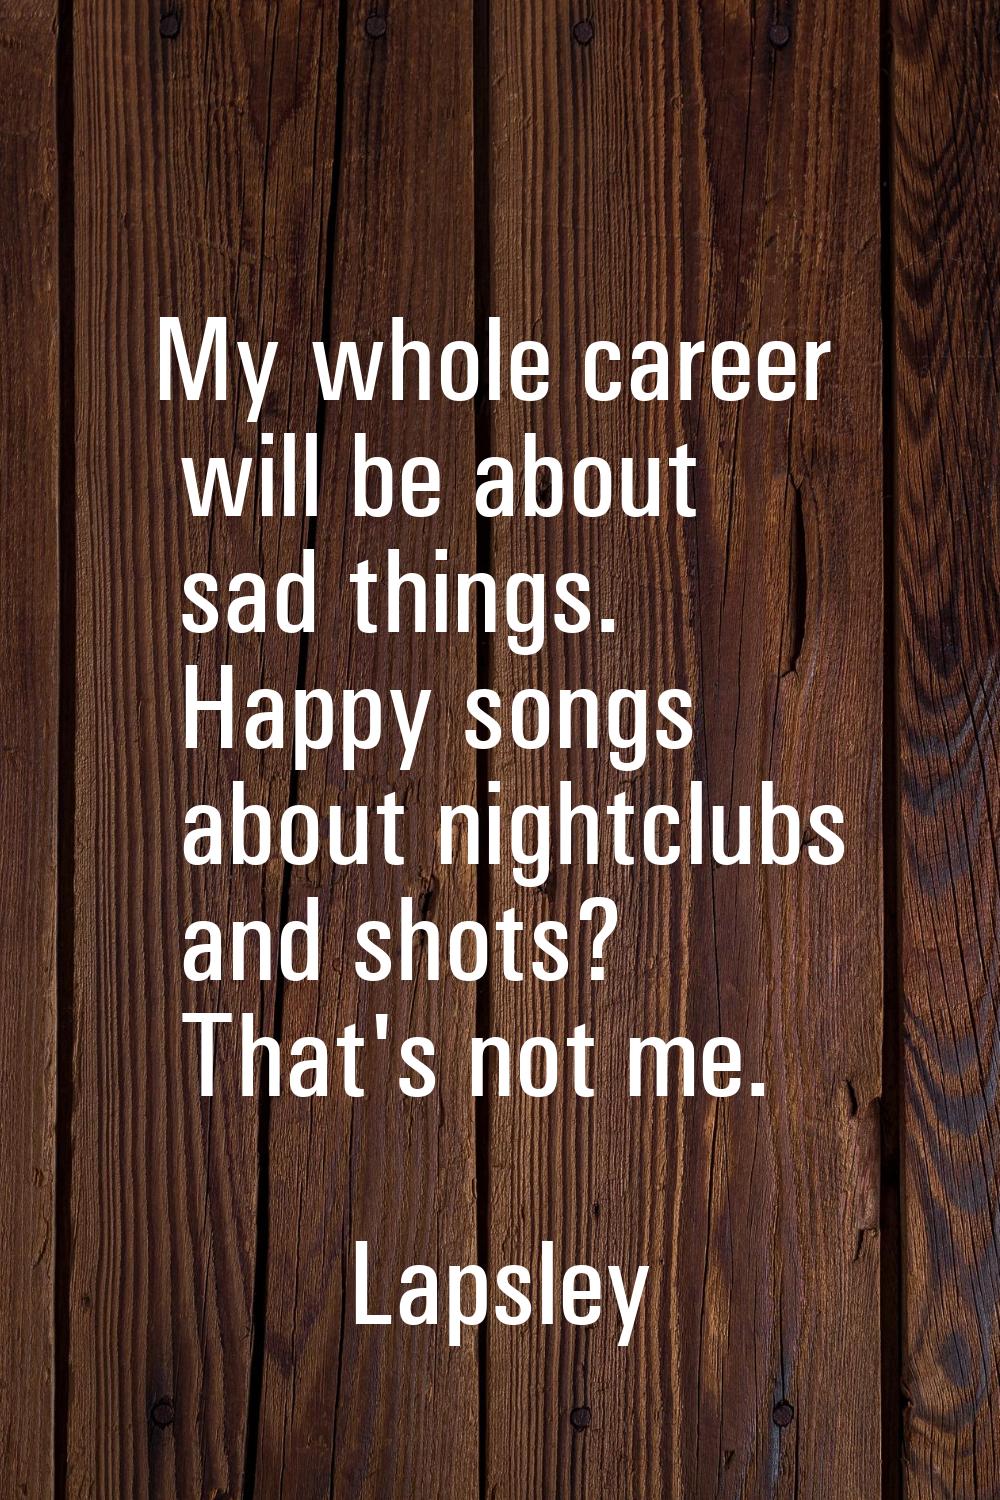 My whole career will be about sad things. Happy songs about nightclubs and shots? That's not me.